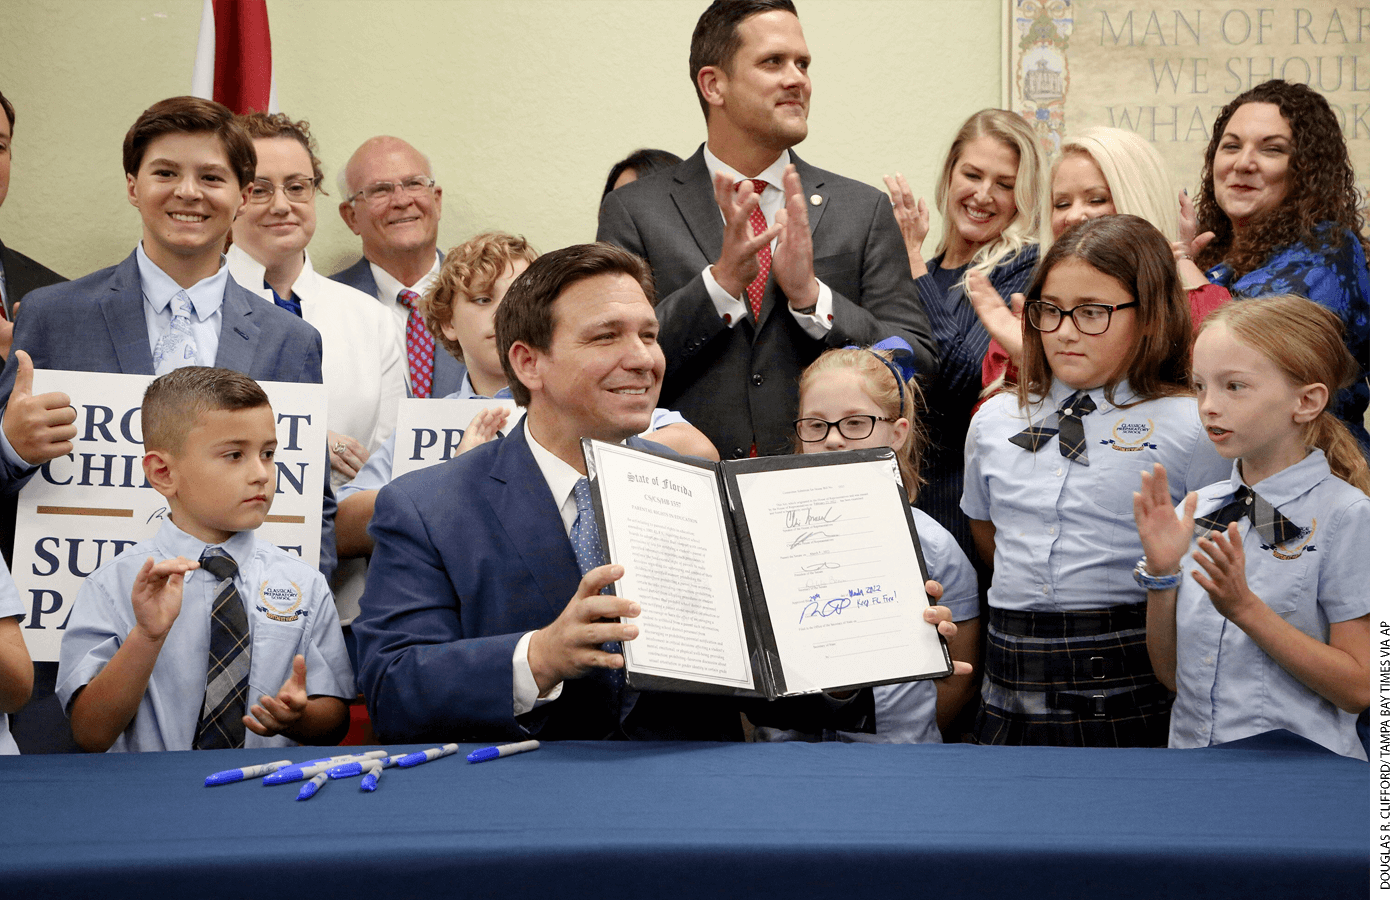 DeSantis displays the Parental Rights in Education Act he signed into law in March 2022 at Classical Preparatory School in Shady Hills. Opponents dub it the “Don’t Say Gay” law.